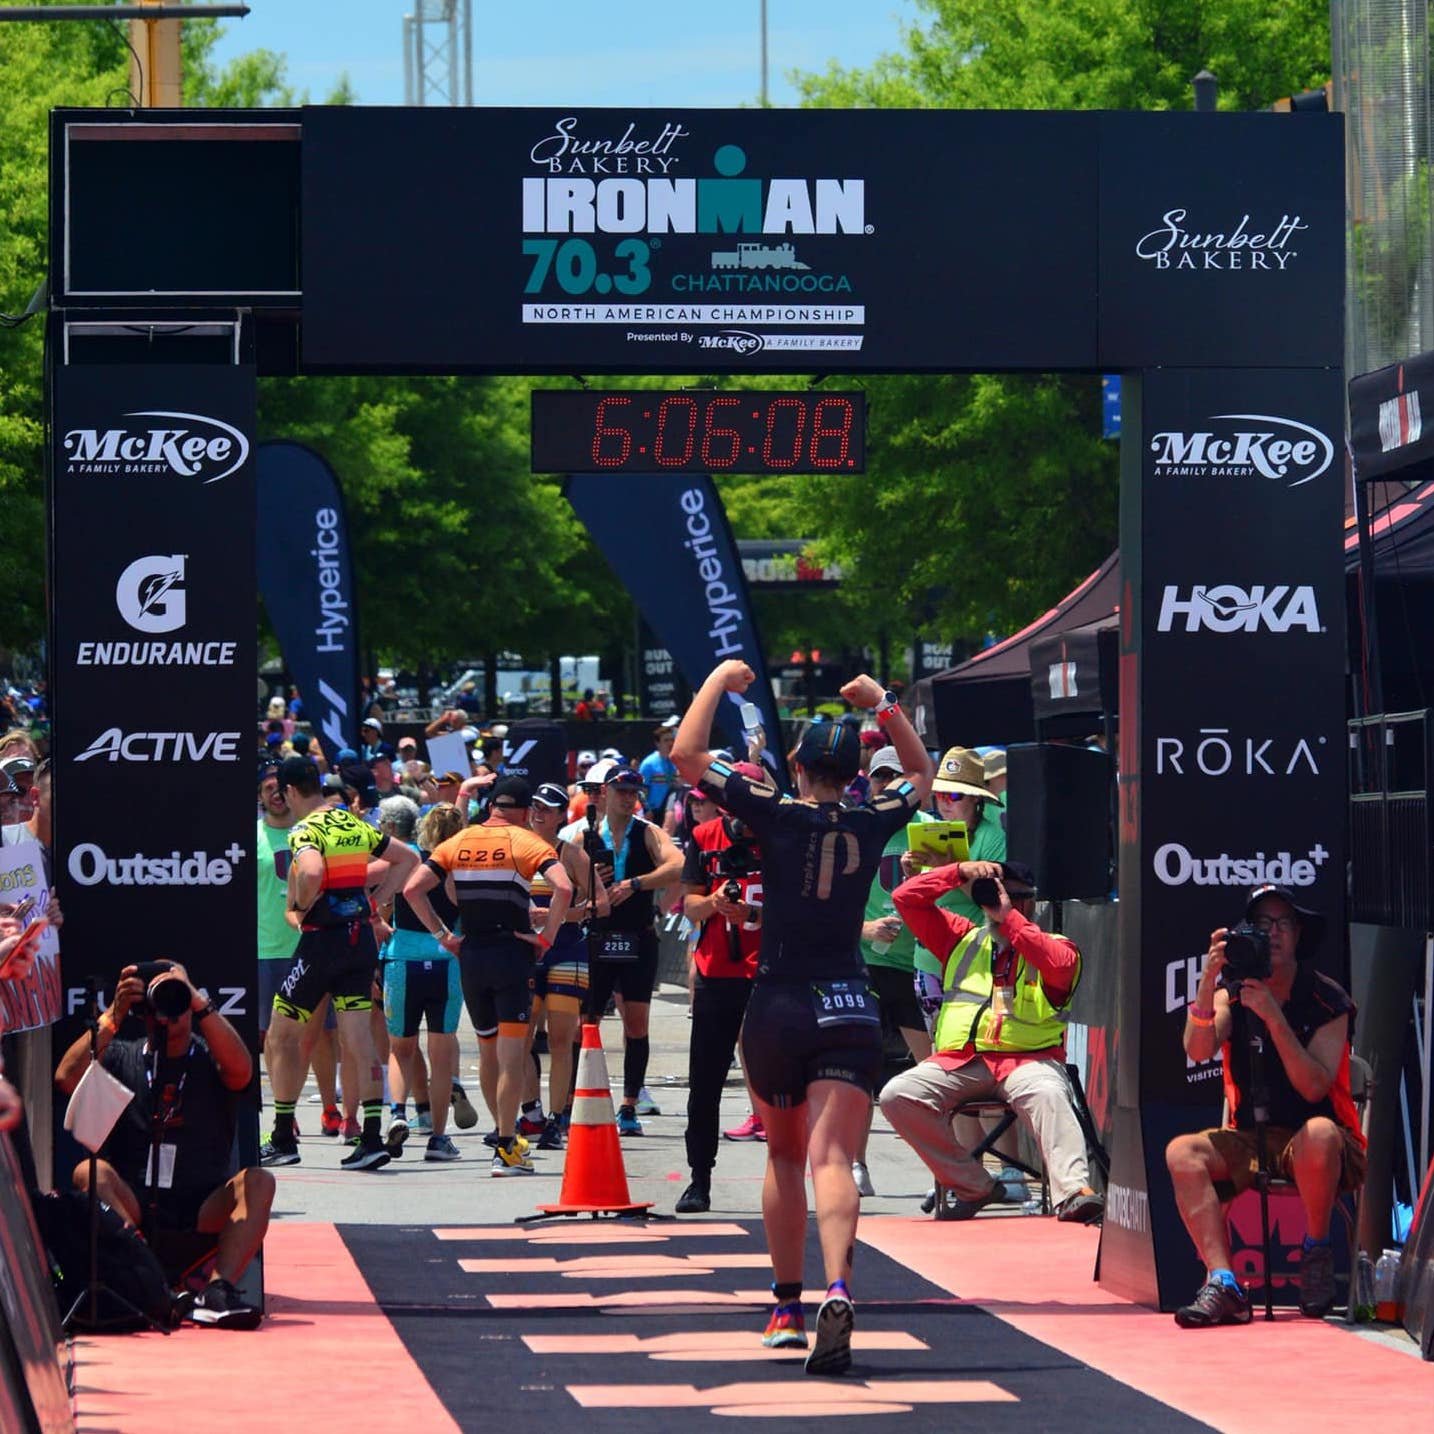 Ironman 70.3 is back this weekend